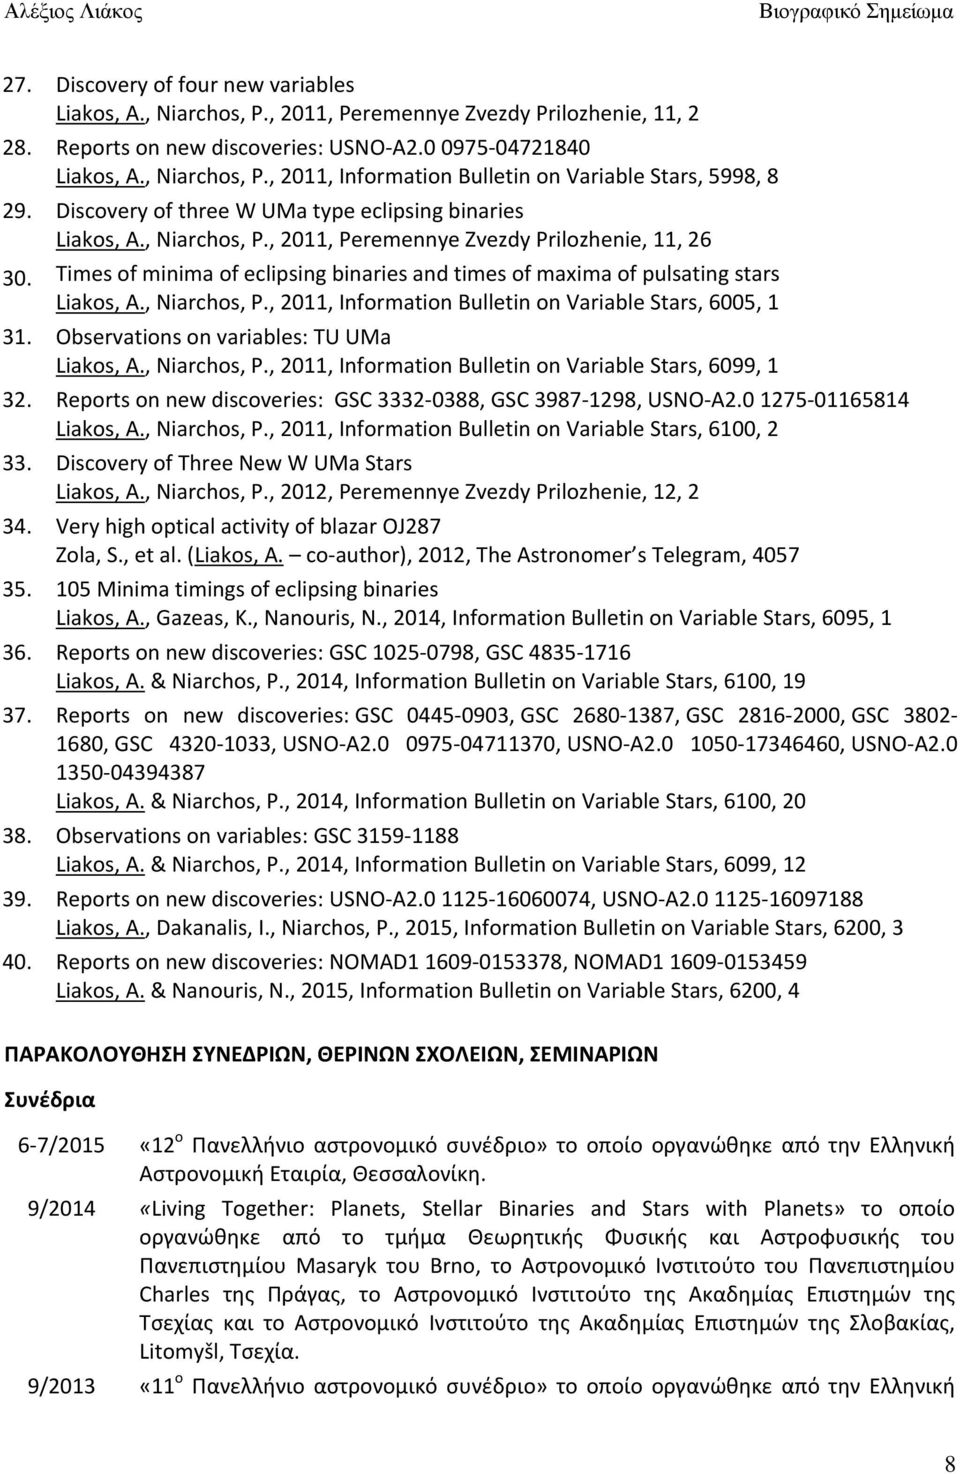 , Niarchos, P., 2011, Information Bulletin on Variable Stars, 6005, 1 Observations on variables: TU UMa Liakos, A., Niarchos, P., 2011, Information Bulletin on Variable Stars, 6099, 1 Reports on new discoveries: GSC 3332-0388, GSC 3987-1298, USNO-A2.